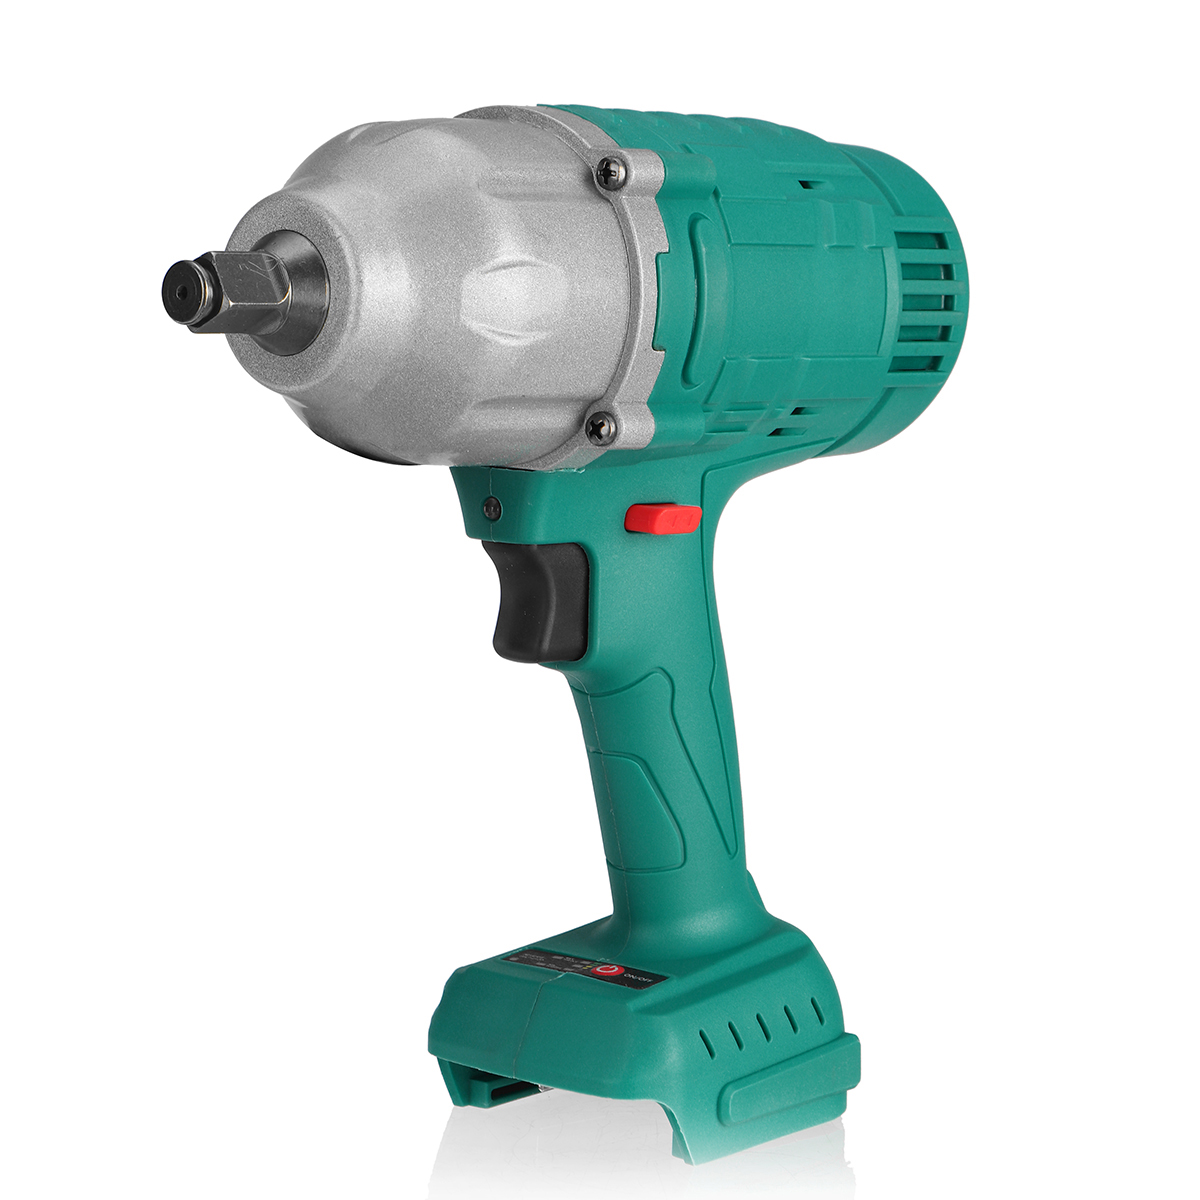 Find BLMIATKO 18V 1900N.m Electric Brushless Impact Wrench Rechargeable Woodworking Maintenance Tool for Sale on Gipsybee.com with cryptocurrencies